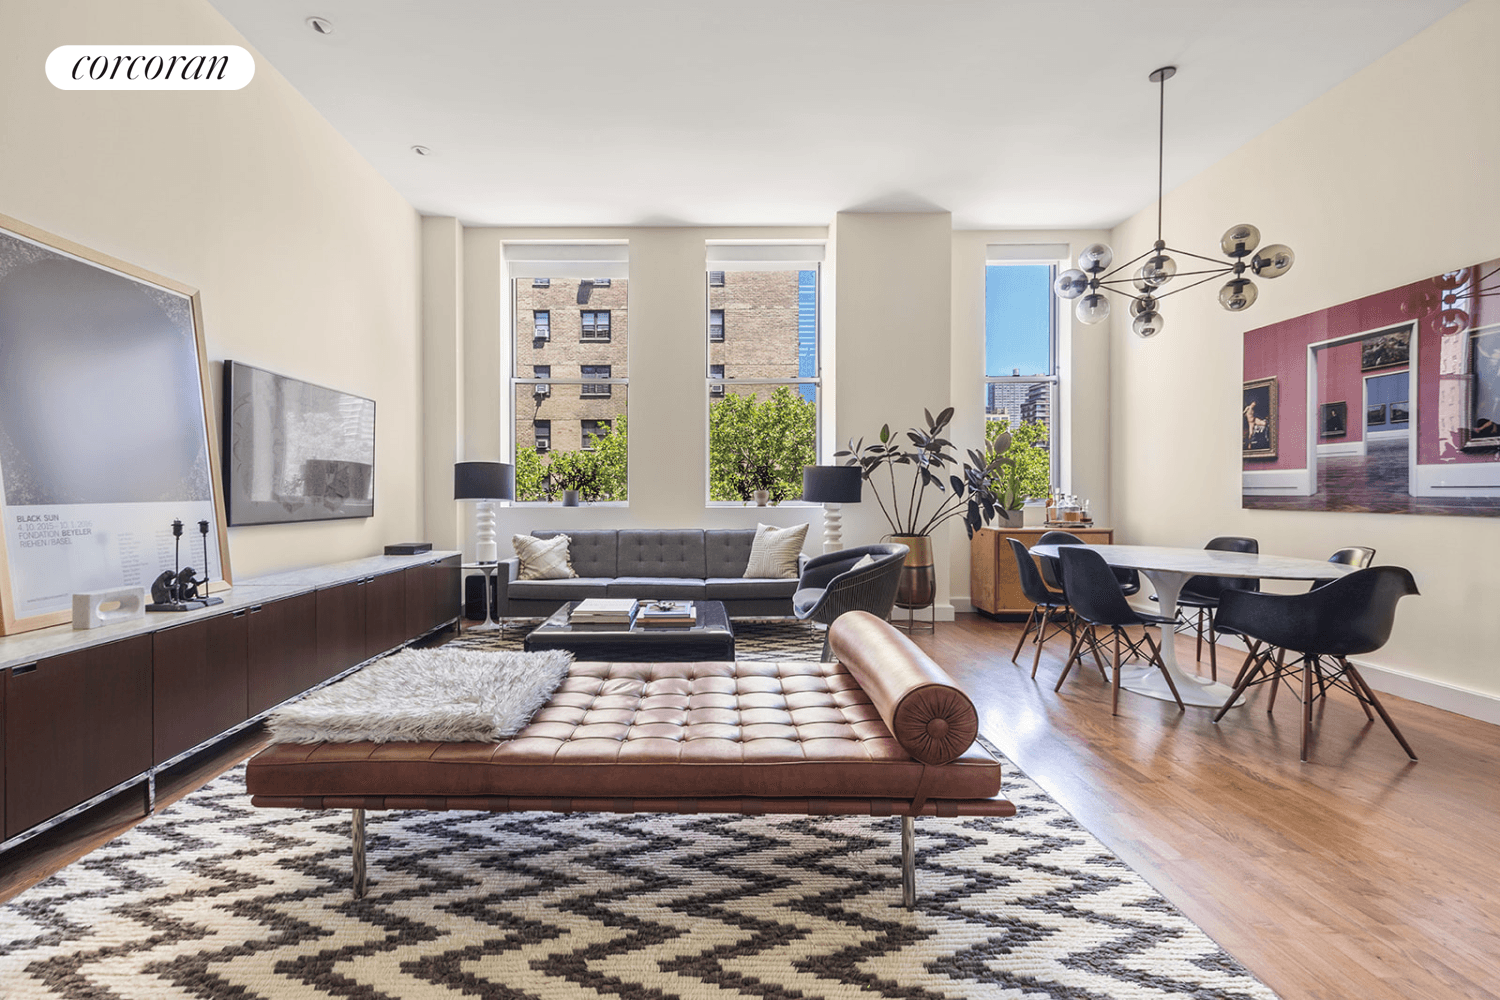 Indulge in unrivaled luxury with this impeccably renovated loft situated in the vibrant heart of West Chelsea, just a stone's throw away from the iconic High Line Park and Avenues, ...